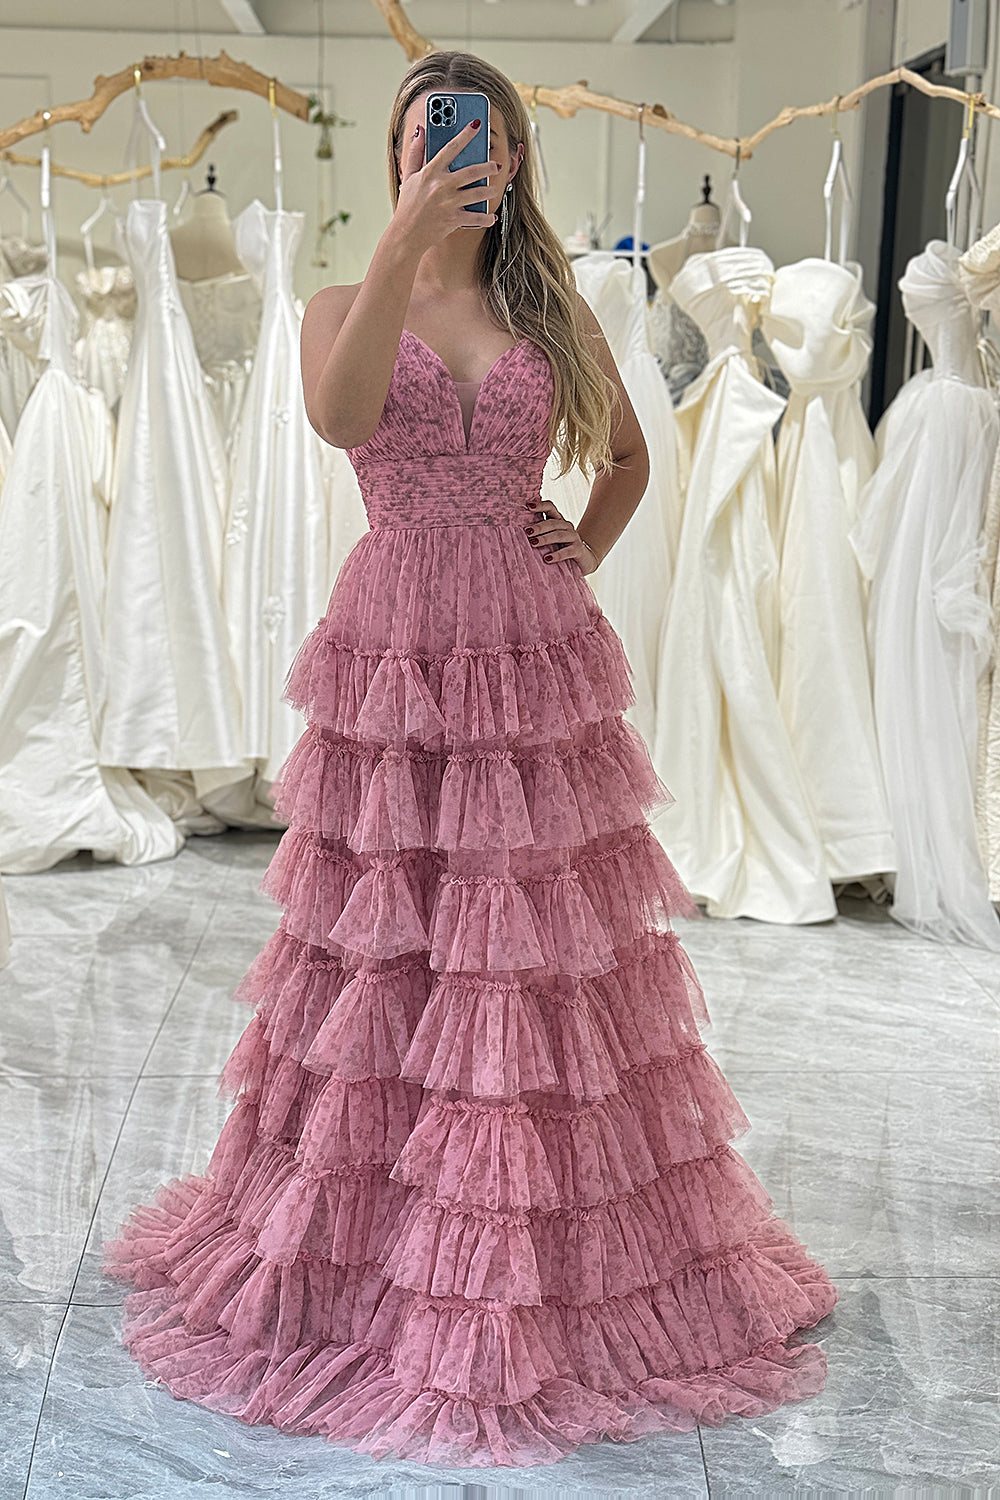 Pink A-Line Spaghetti Straps Layered Tulle Prom Dress with Floral Printed